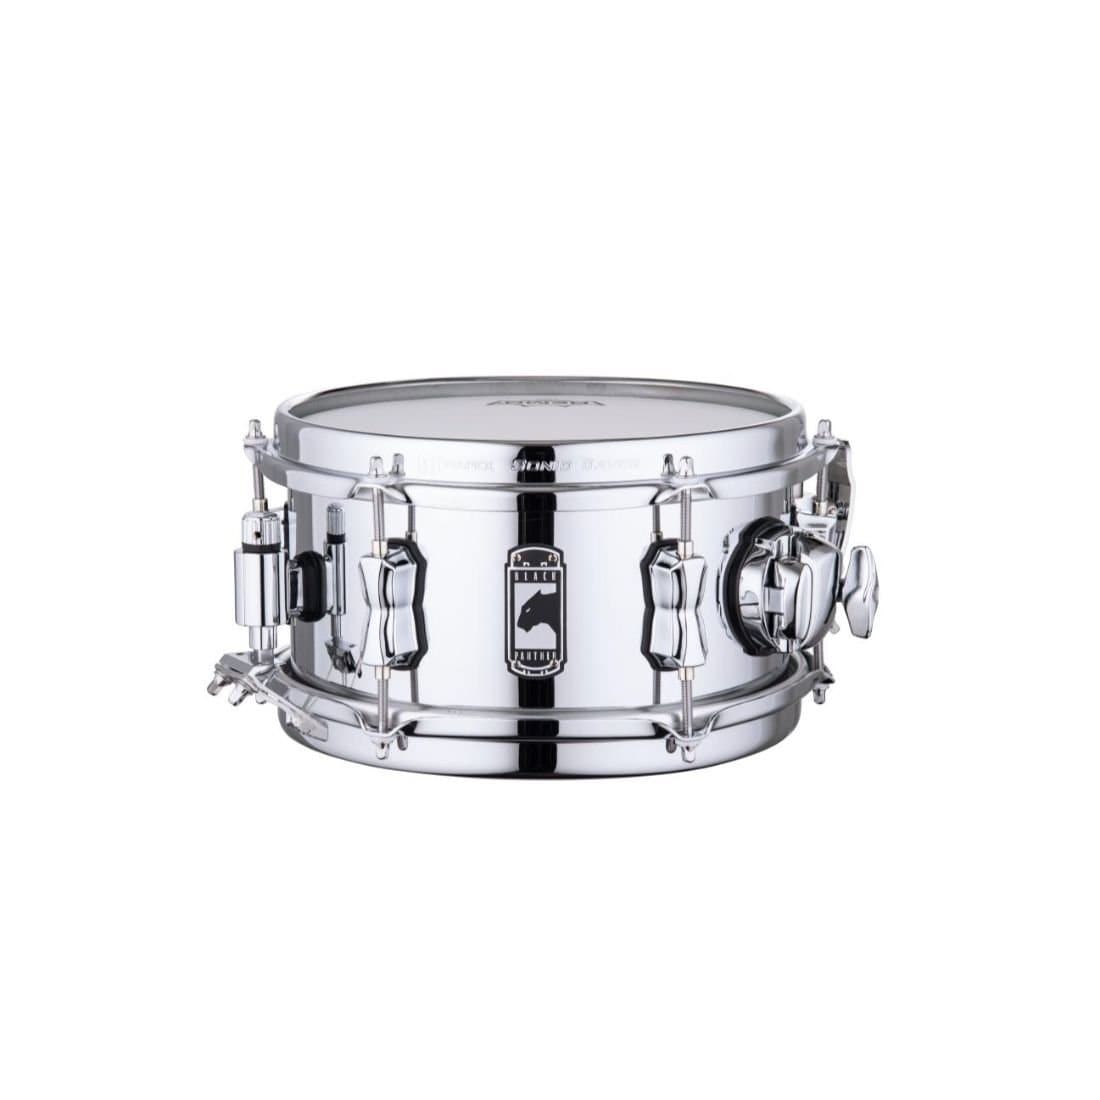 Mapex Black Panther 10x5.5 Wasp Snare Drum - Steel